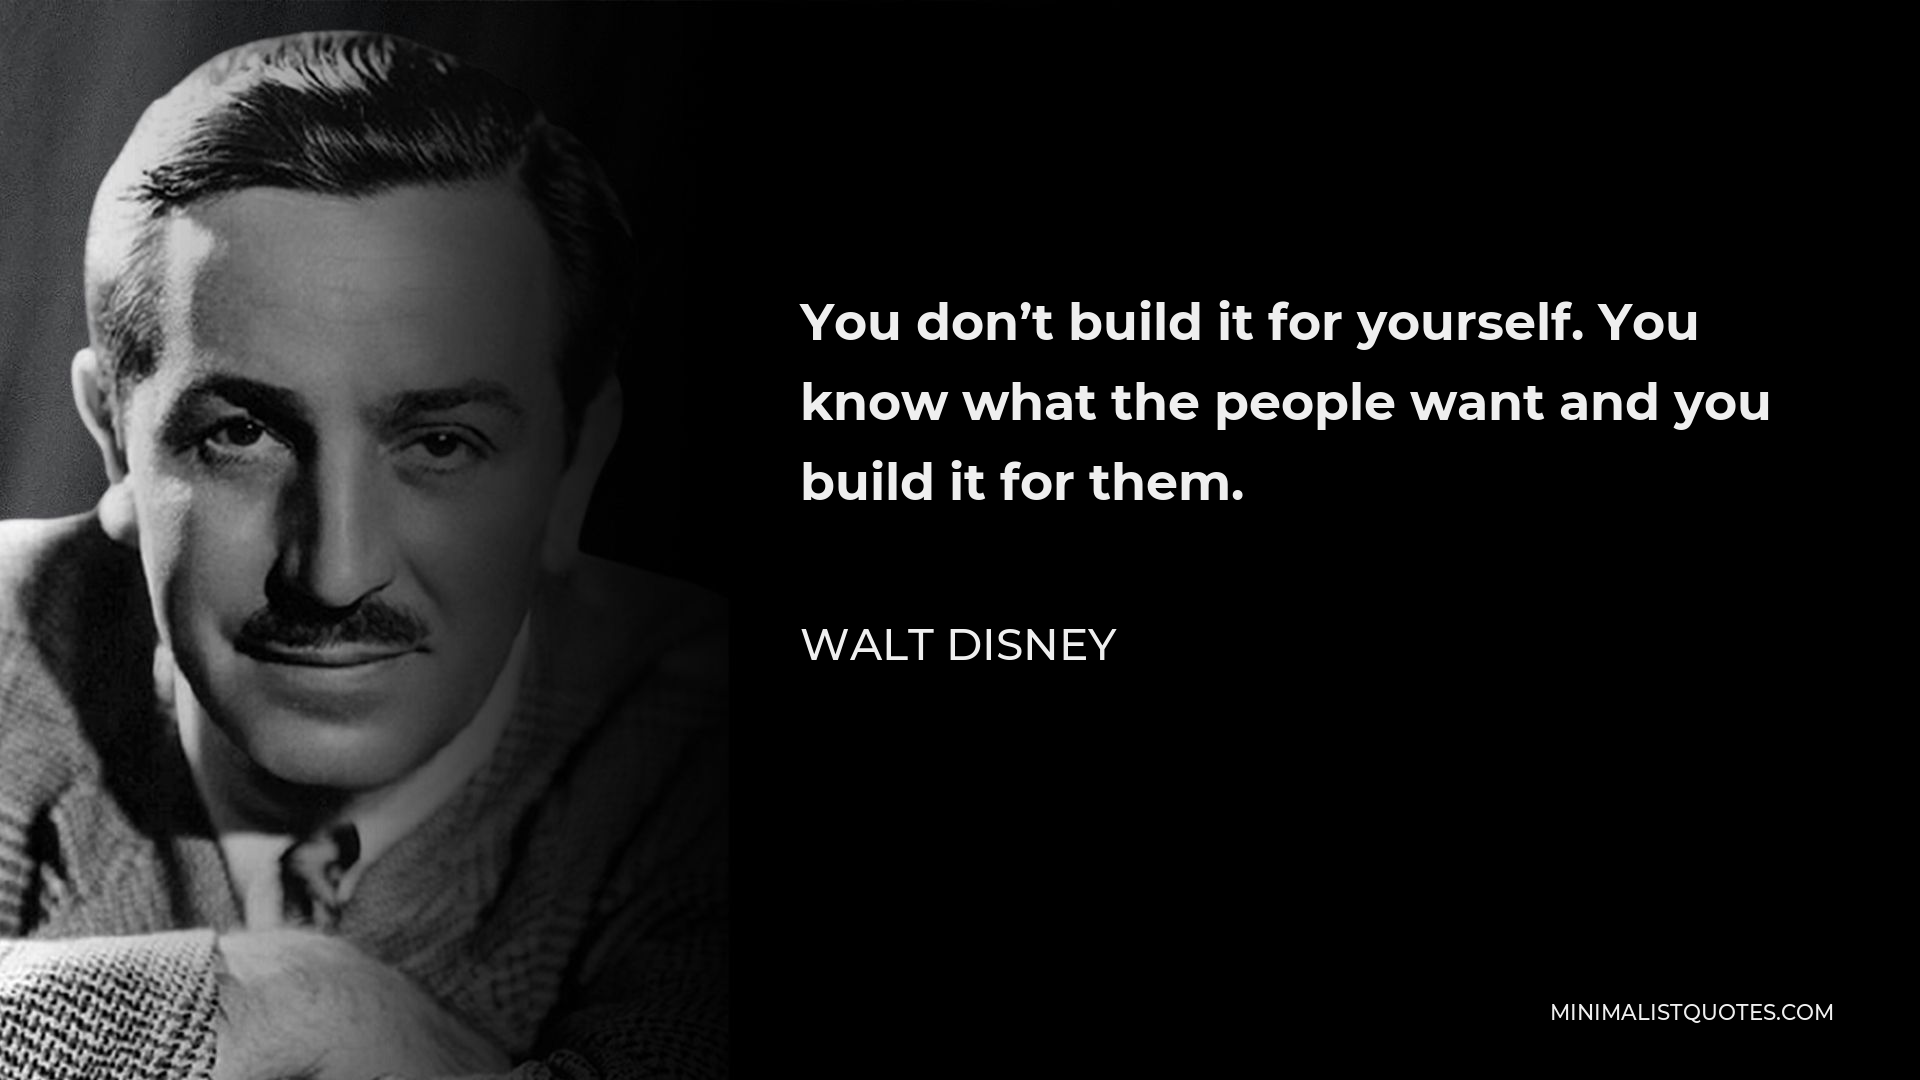 Walt Disney Quote - You don’t build it for yourself. You know what the people want and you build it for them.